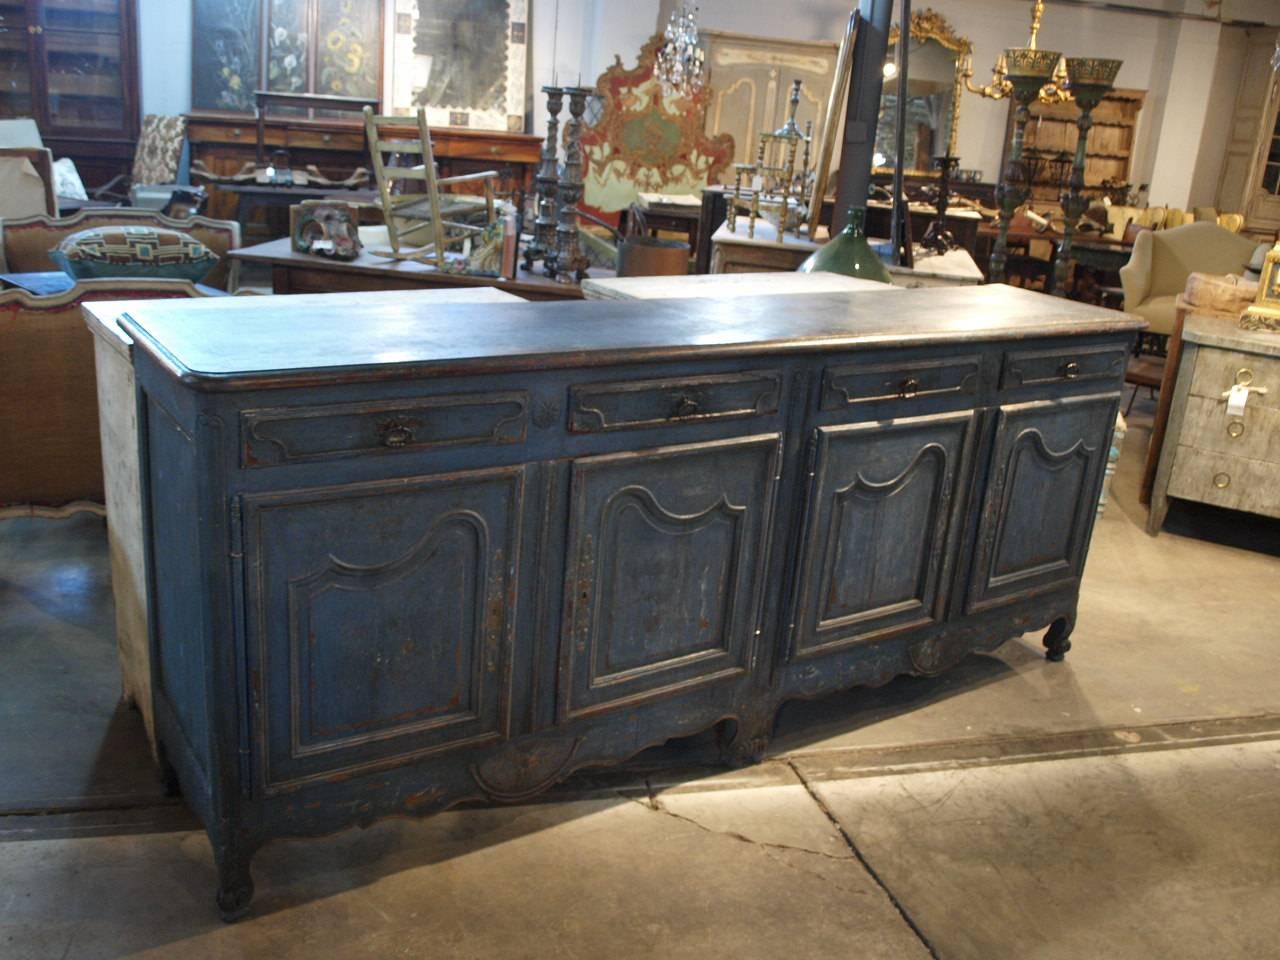 A large scale French Provencal Enfilade - Buffet in painted wood.  Beautifully constructed with four drawers over four paneled doors.  Terrific patina and a wonderful painted finish.